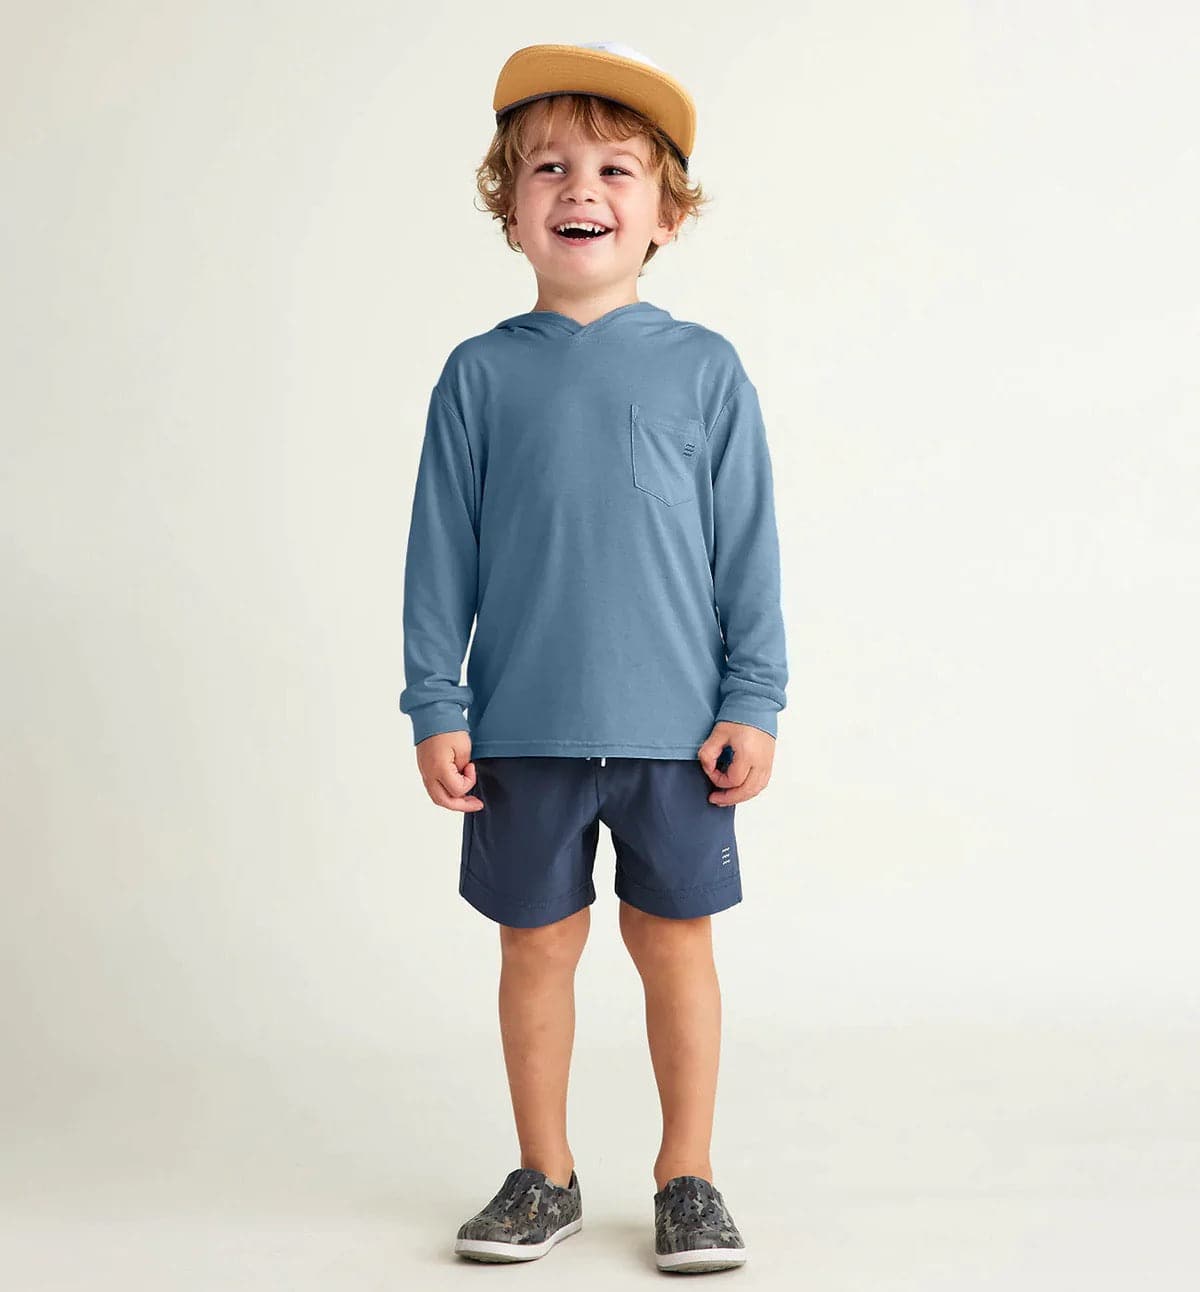 Featuring the Toddler Bamboo Shade Hoody kid's and babies, kid's thermal layering manufactured by Free Fly shown here from an eighth angle.